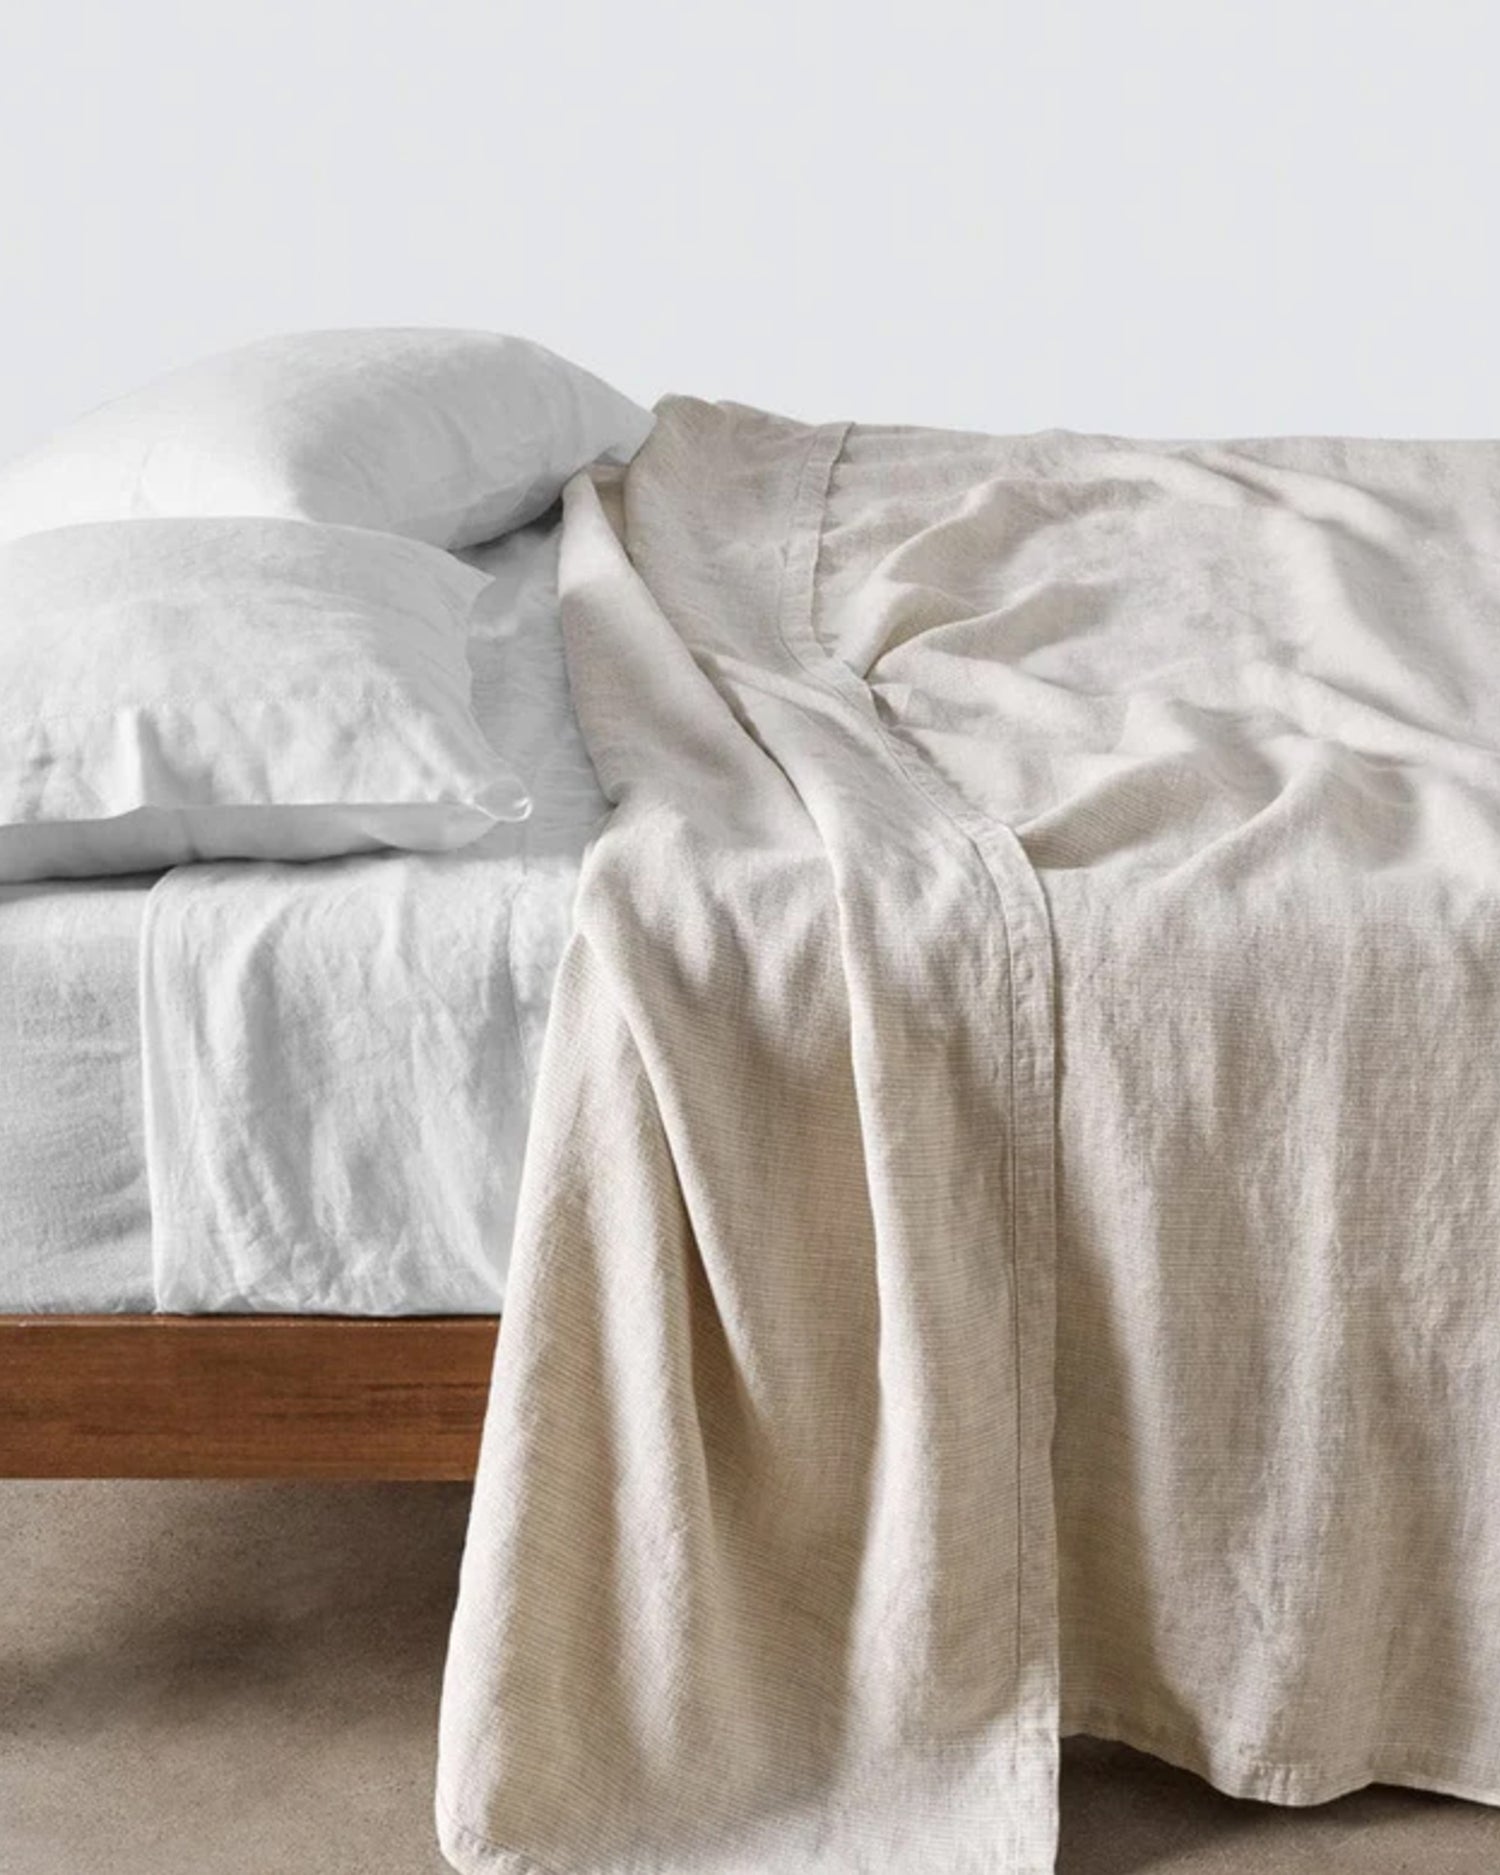 The Citizenry Stonewashed Linen Bed Cover